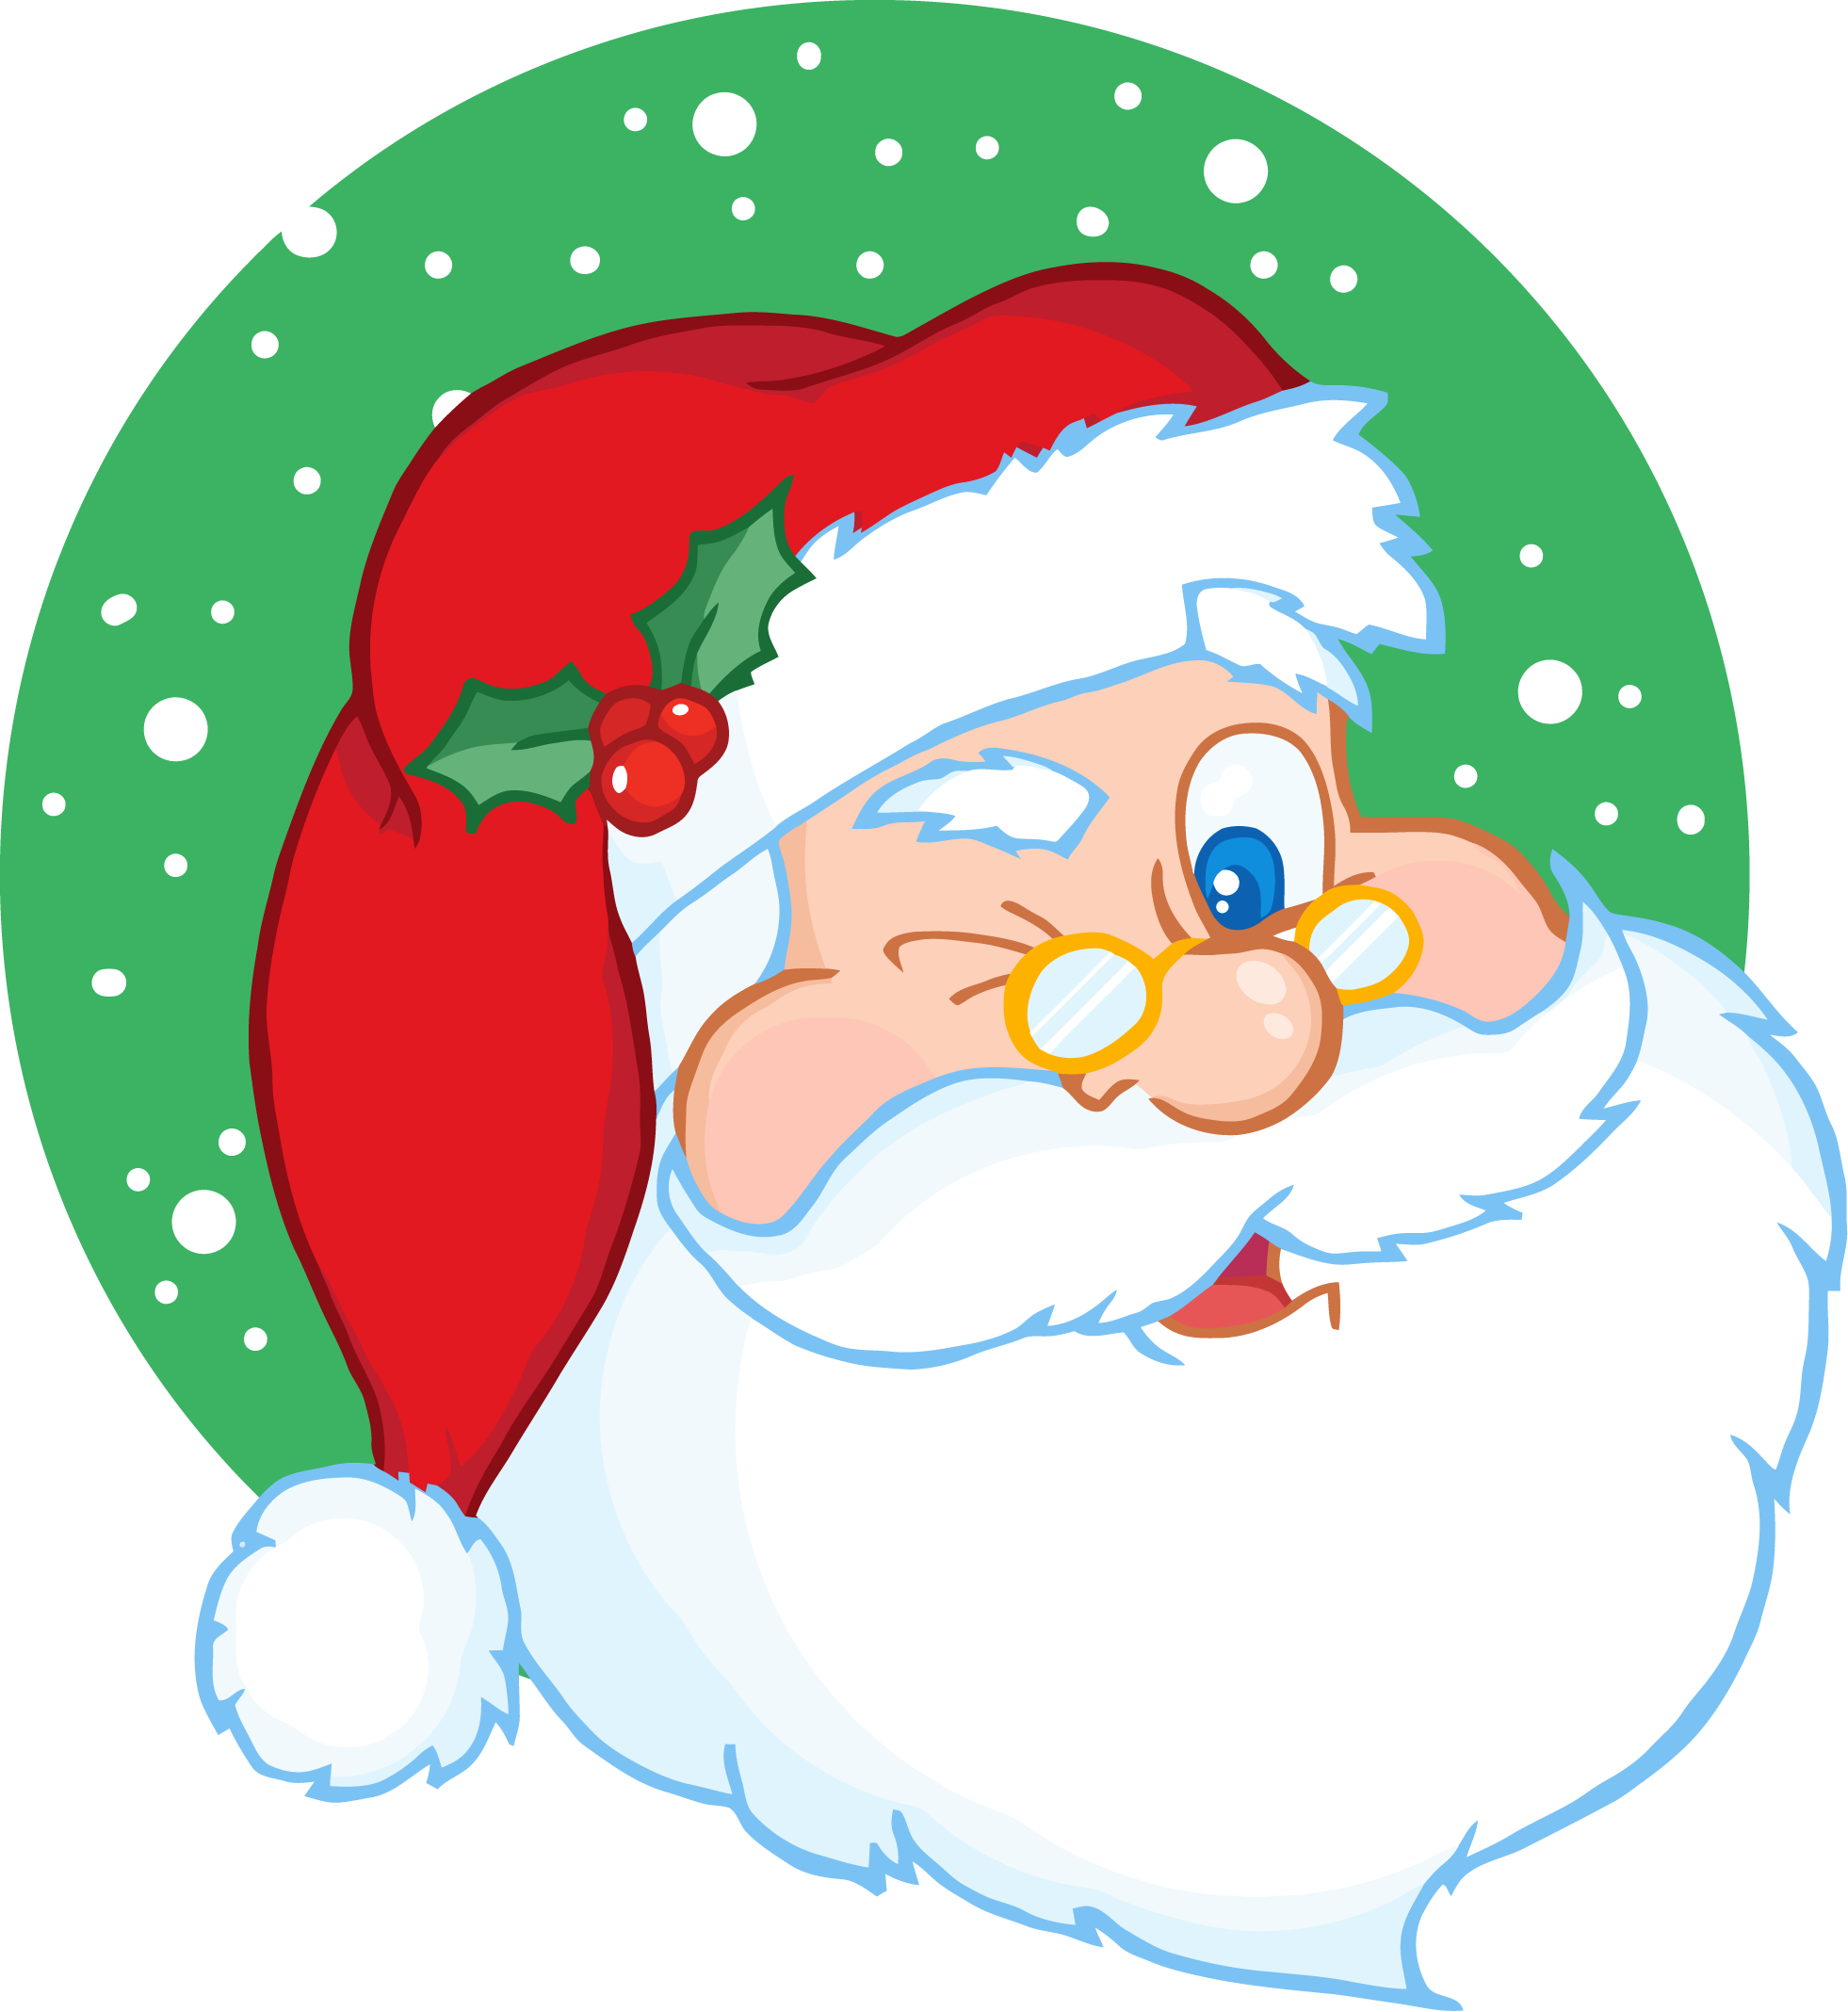 Cartoon Santa Claus Face With A Red Hat And Glasses